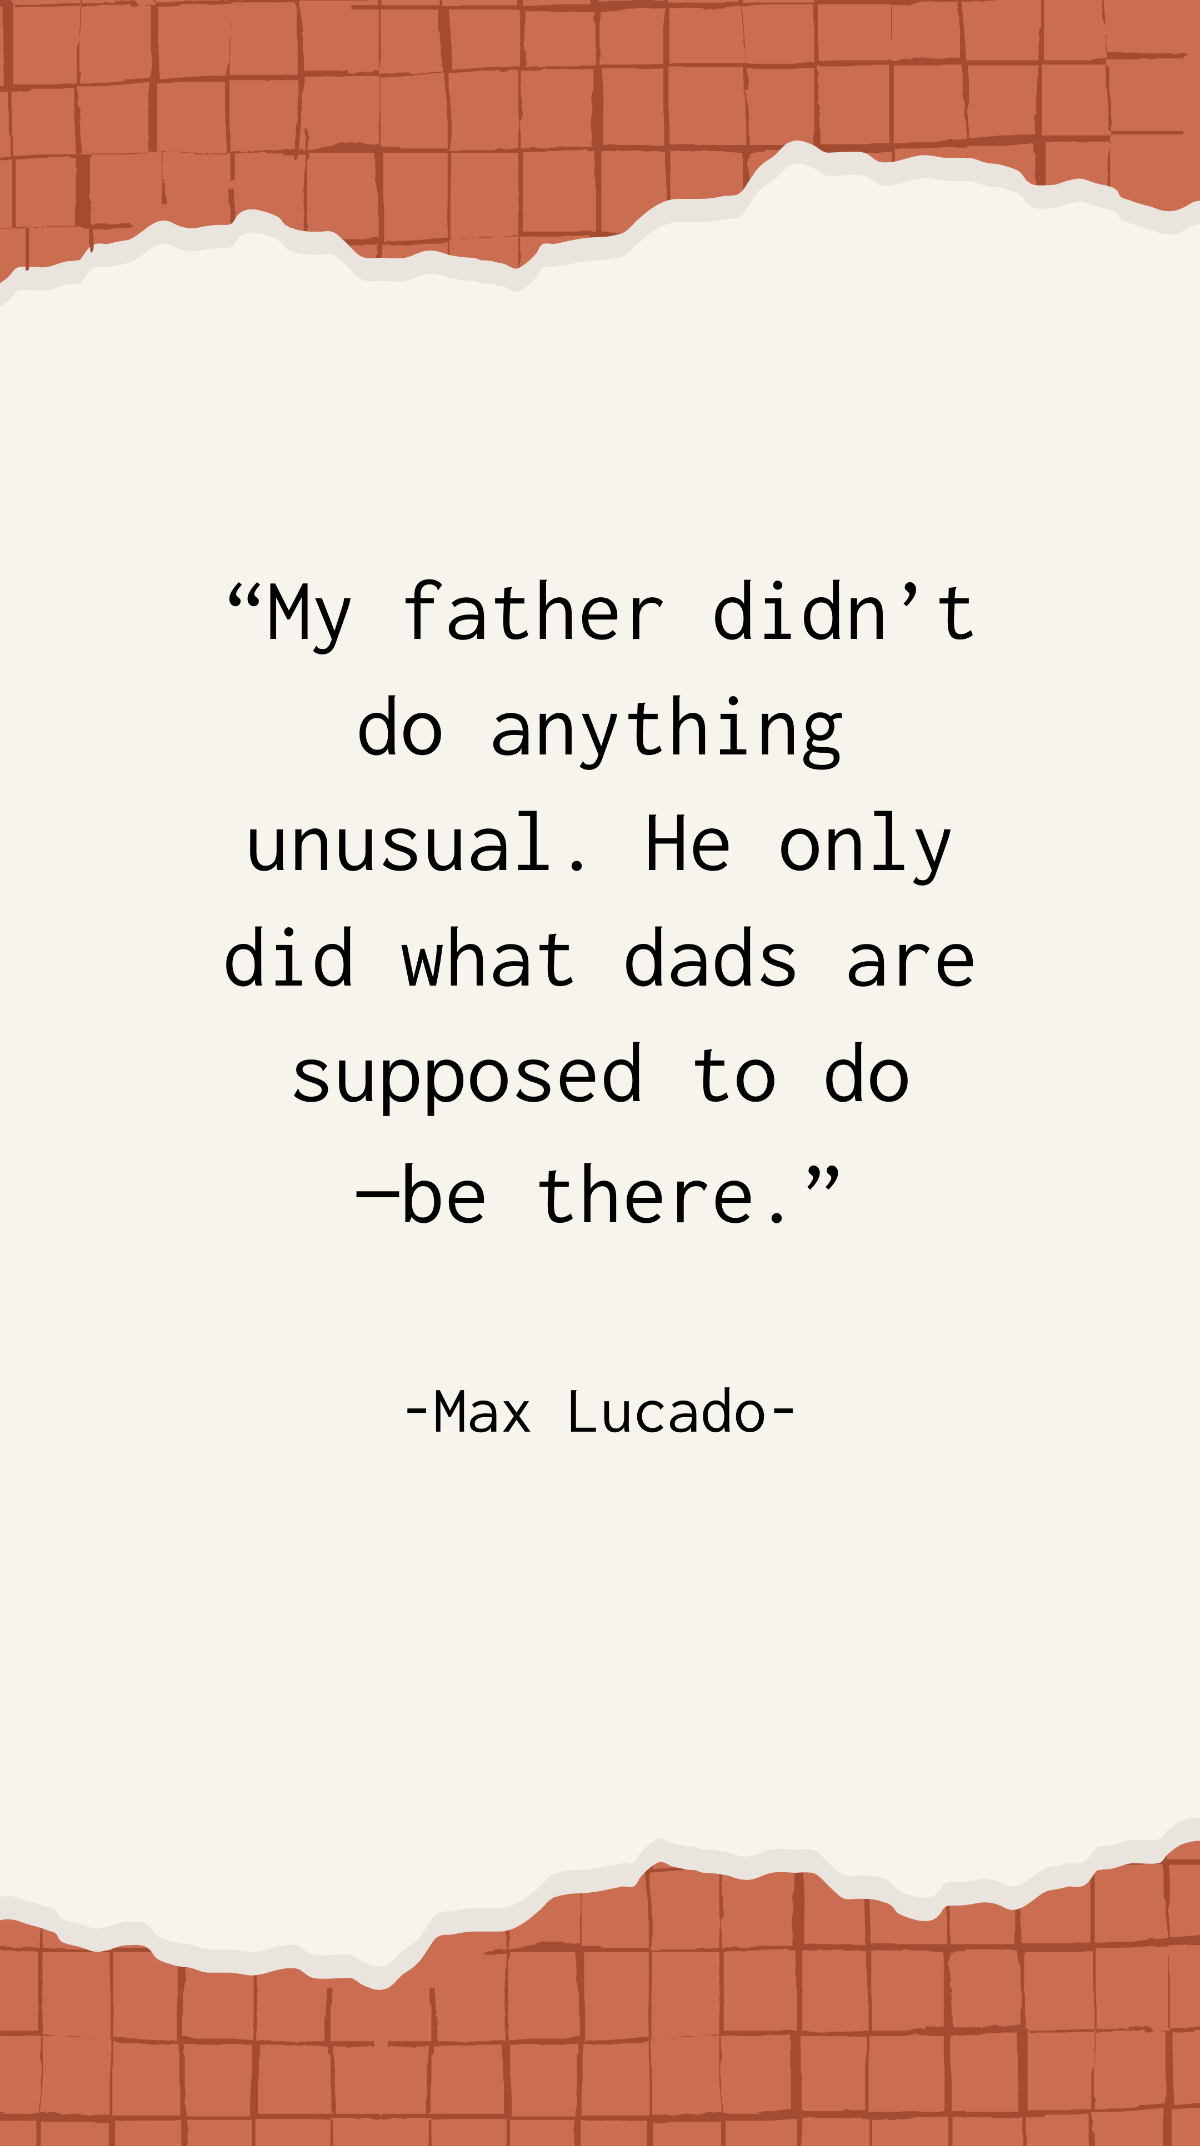 Max Lucado - My father didn’t do anything unusual. He only did what dads are supposed to do be there. Template